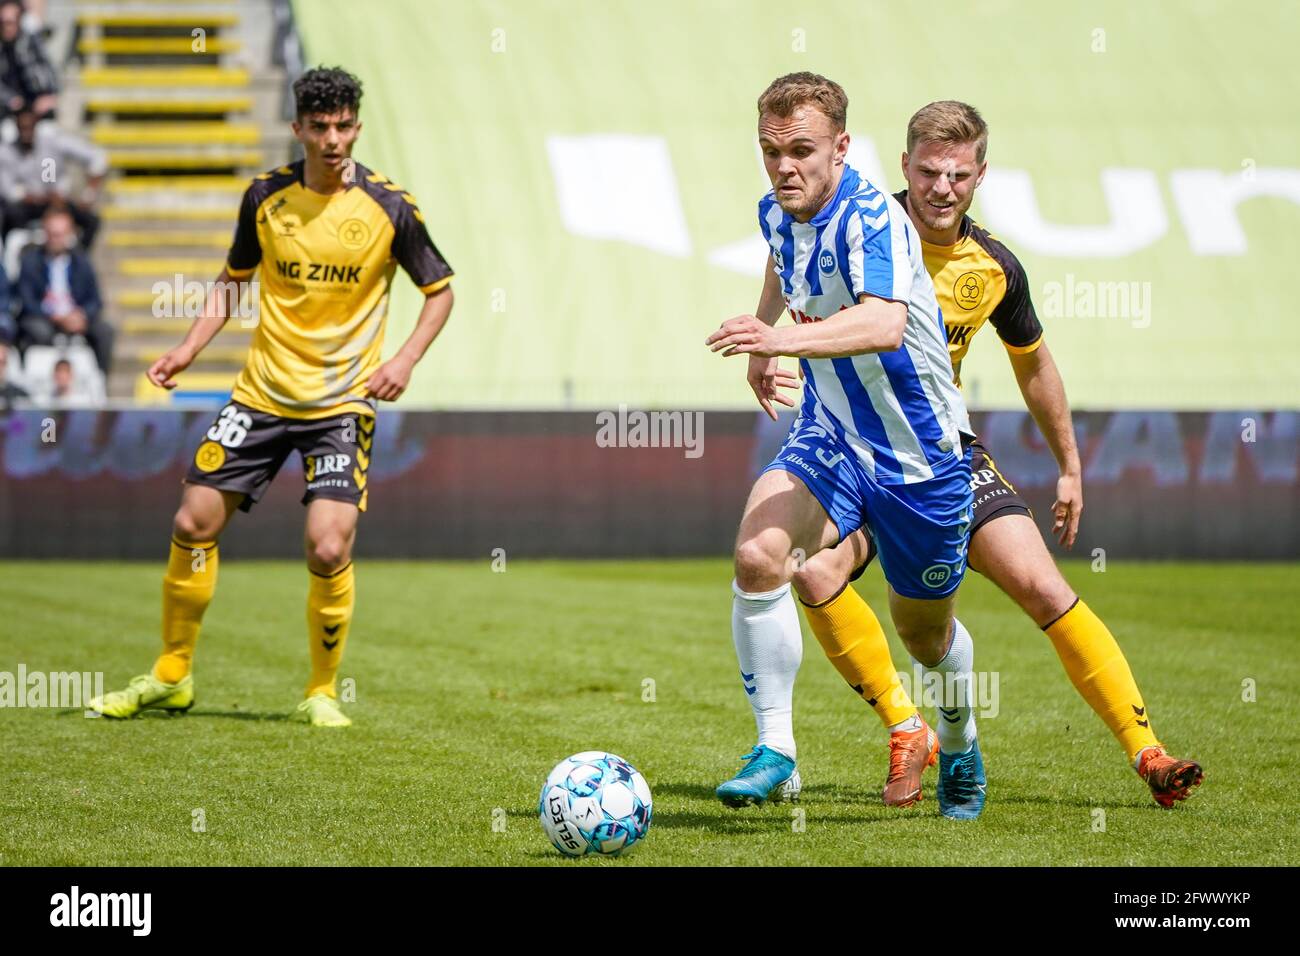 Odense, Denmark. 24th May, 2021. Troels Klove (23) of OB and Jonas (14) AC Horsens seen during the 3F Superliga match between Odense Boldklub and AC Horsens at Nature Energy Park